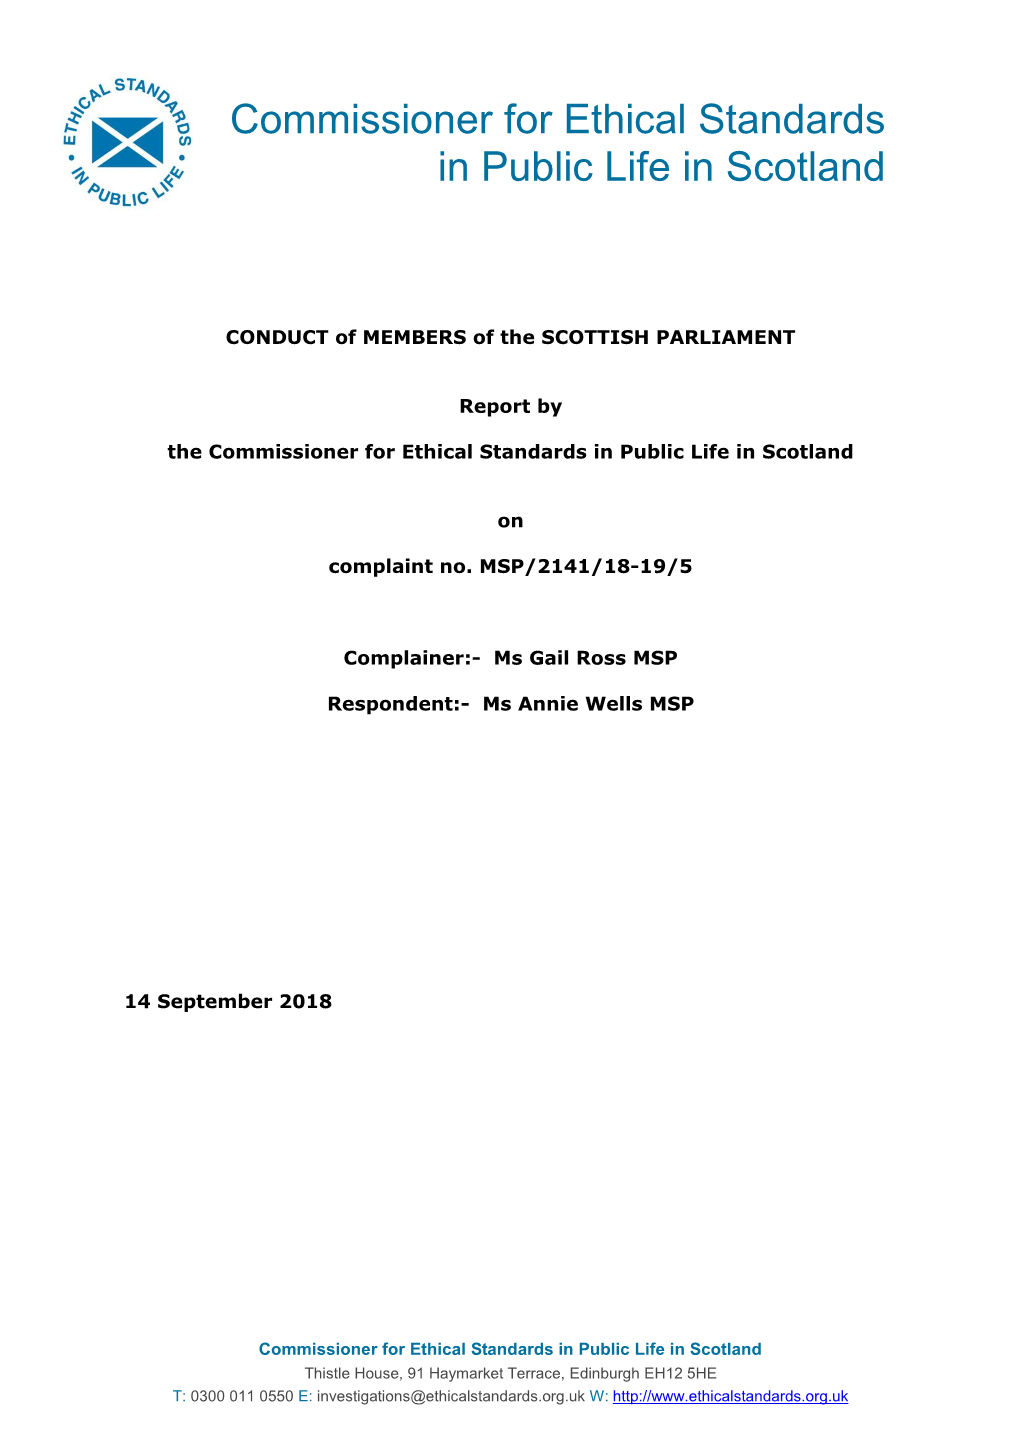 Link to the Report from the Commissioner for Ethical Standards